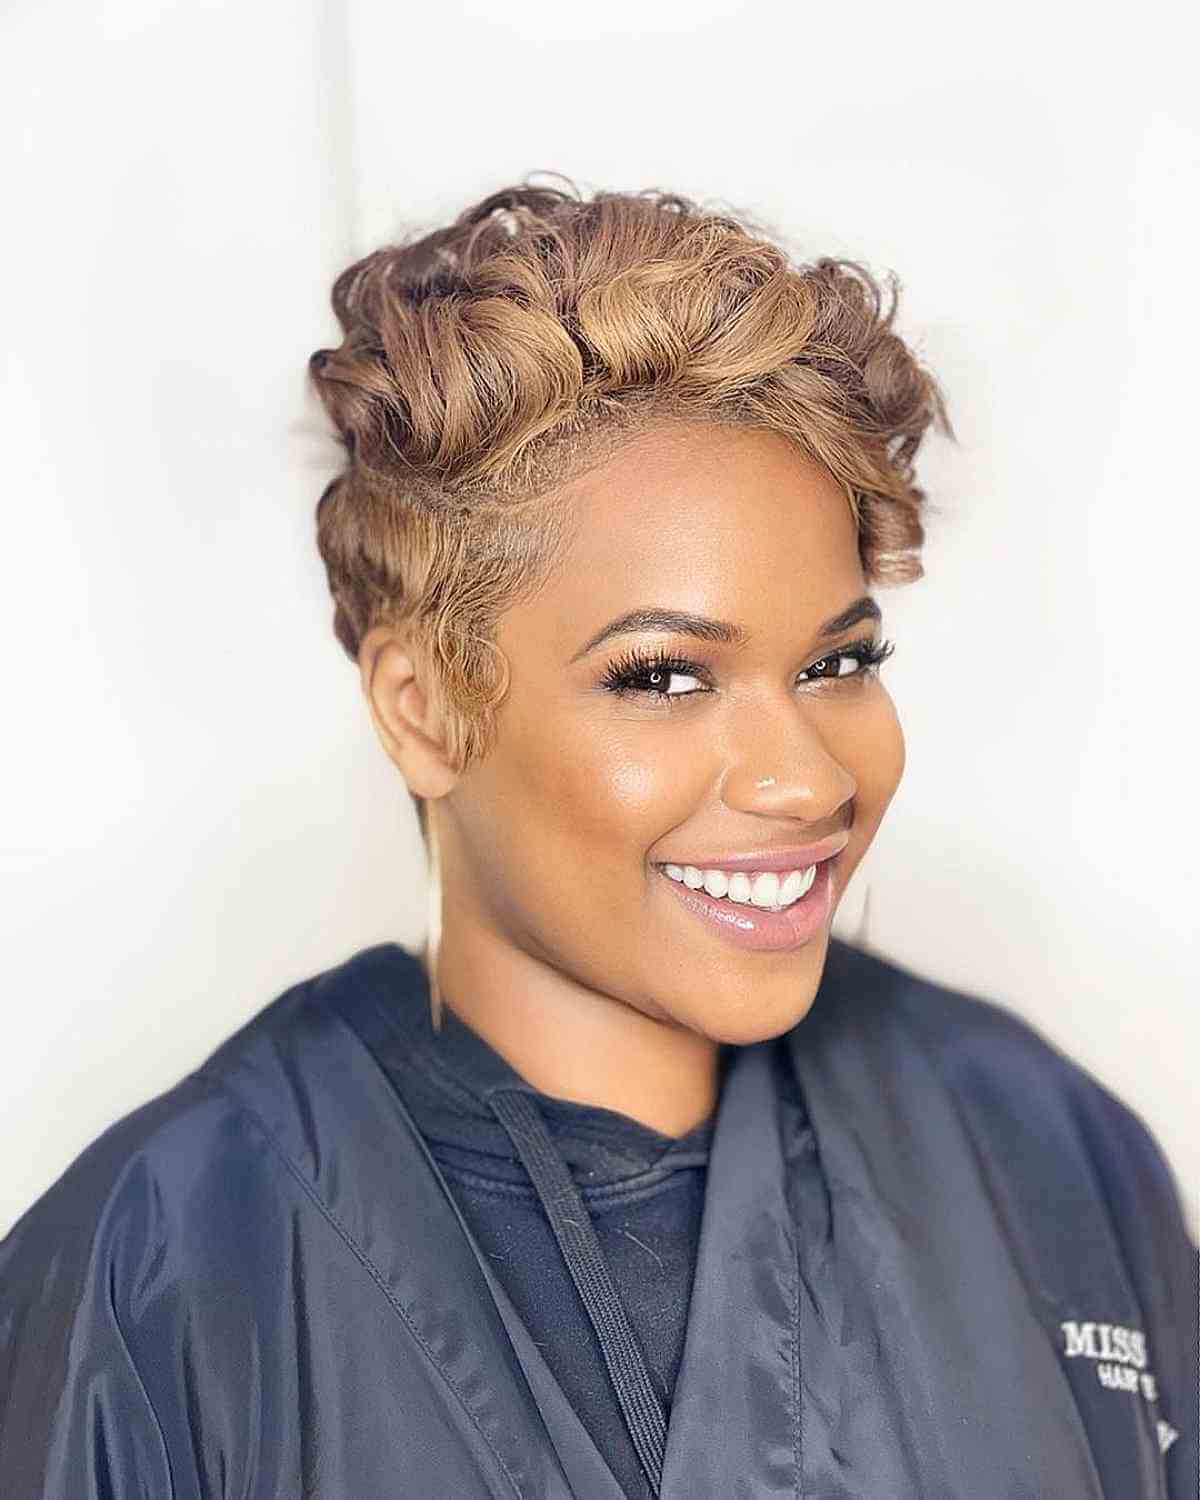 25 Natural Hairstyles for Short Hair to Try in 2023